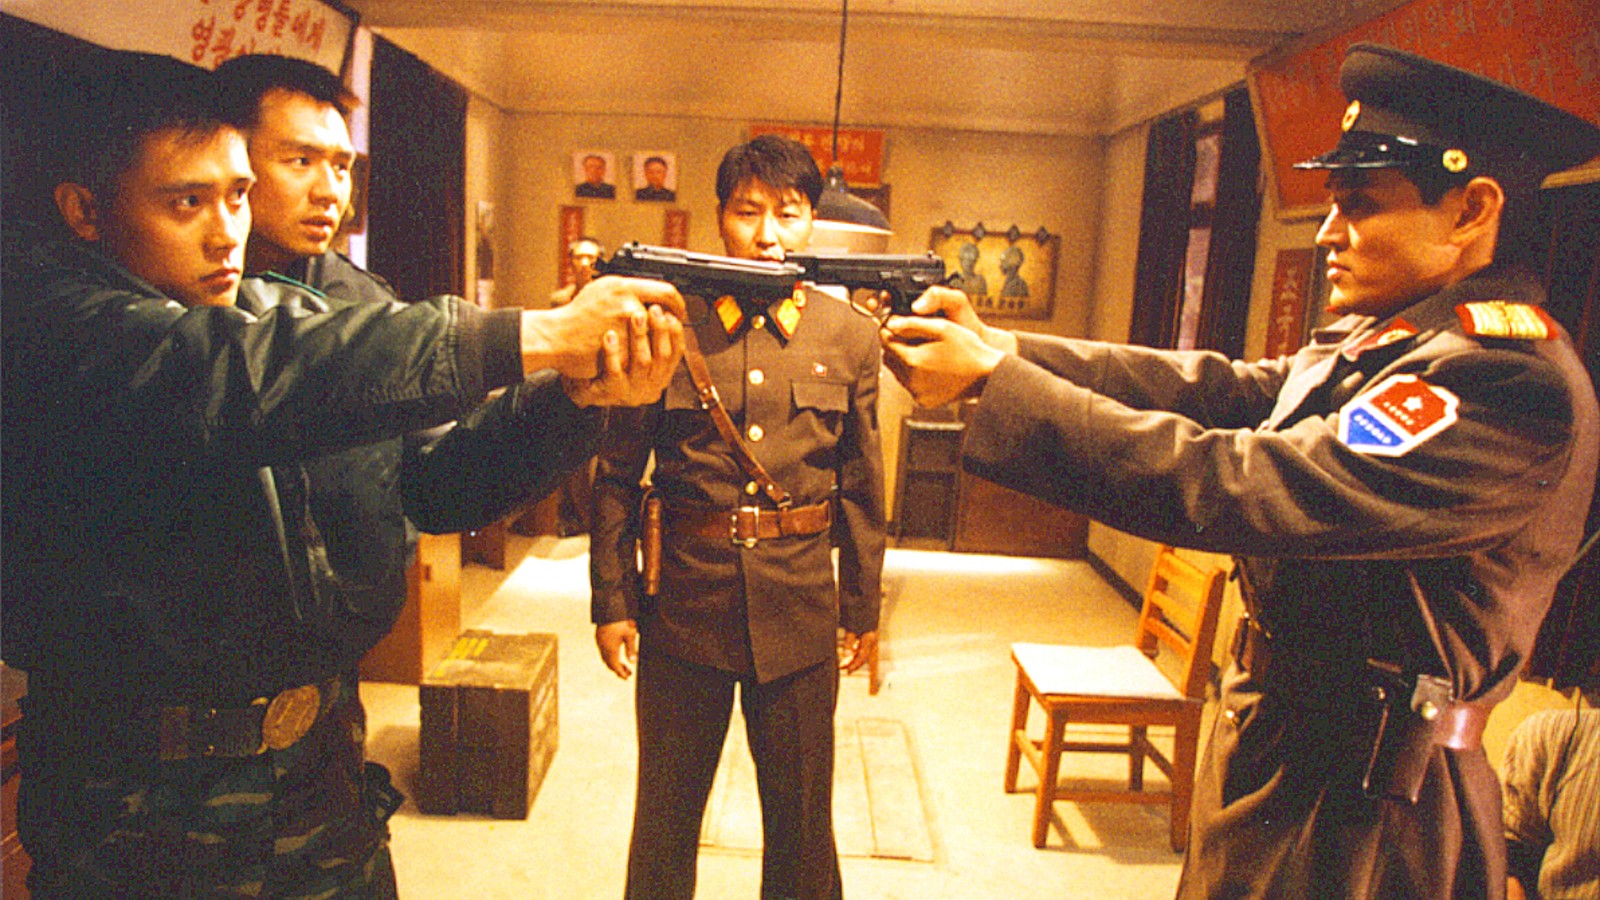 Joint Security Area' Blu-Ray Review - A Staggering Plea For Unification From Park Chan-wook